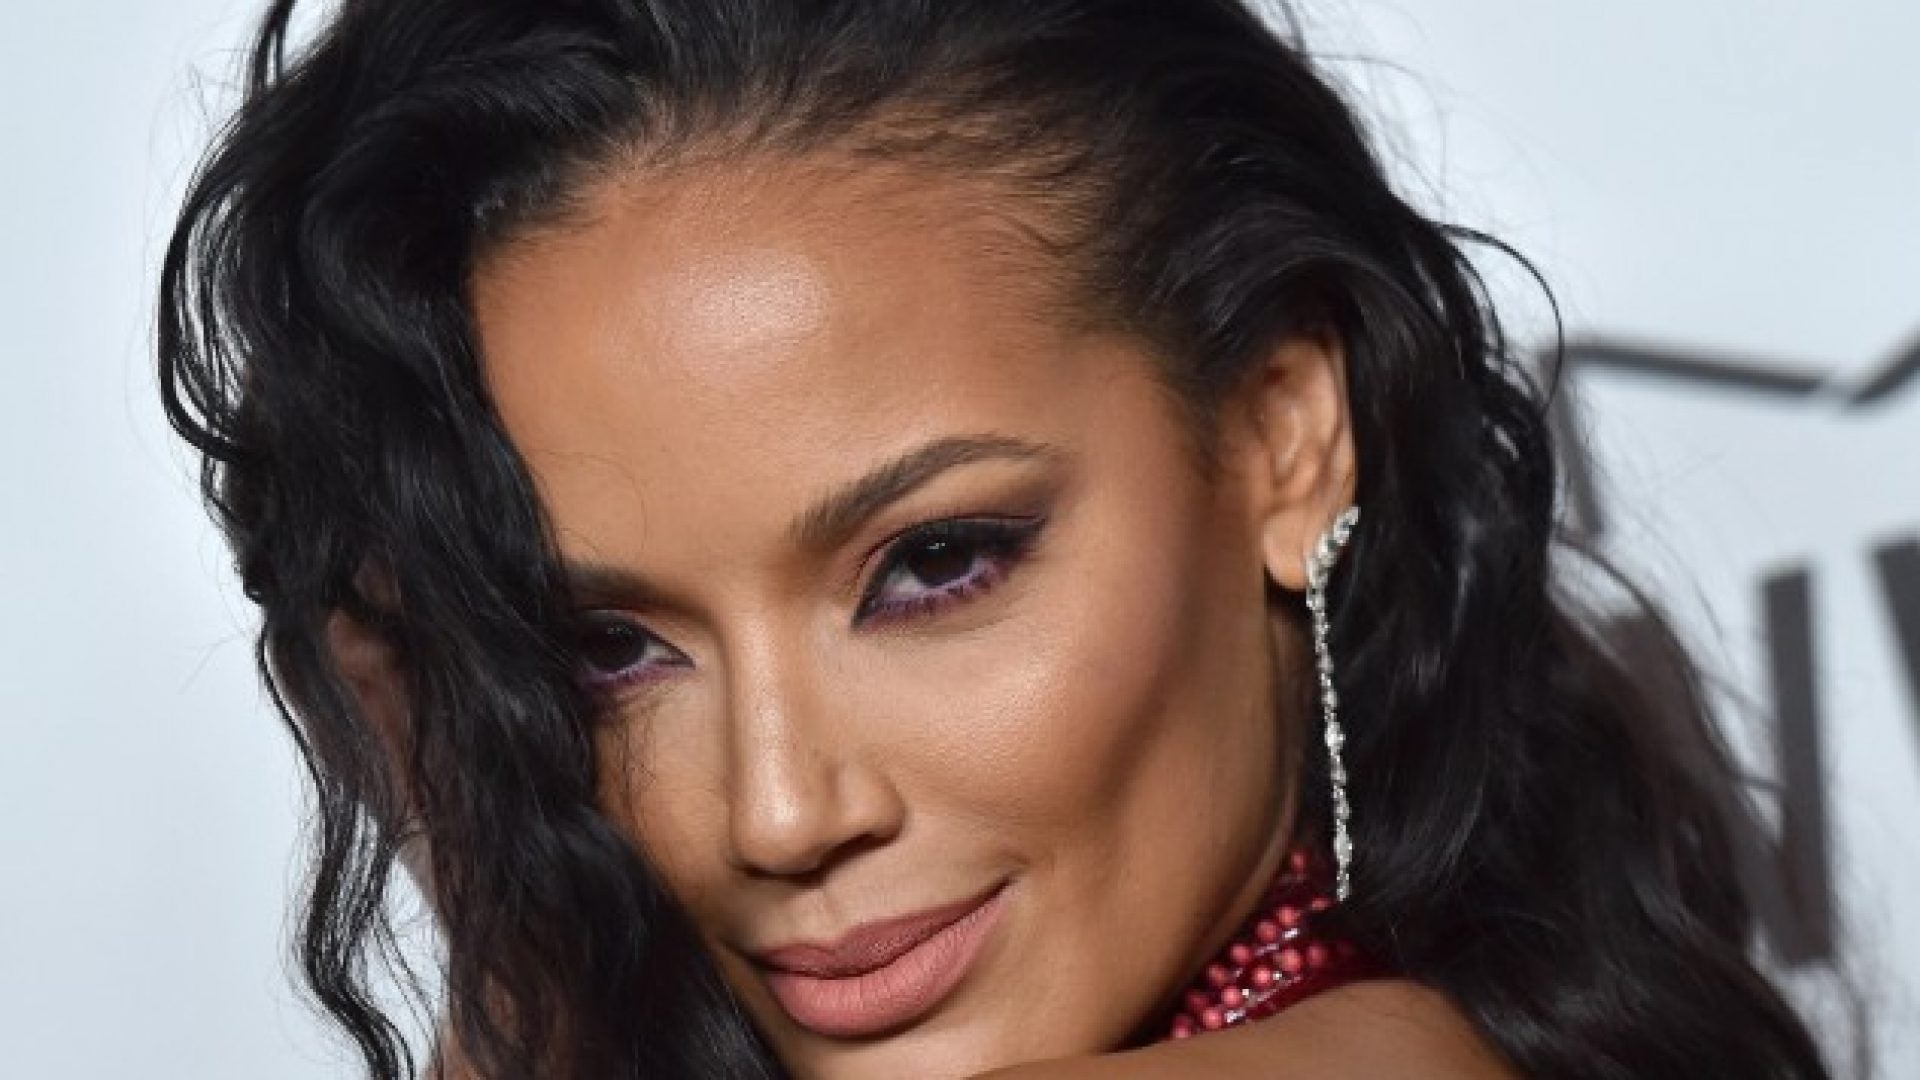 Selita Ebanks Discusses The Dark Side Of Beauty And What She’s Doing To Change It